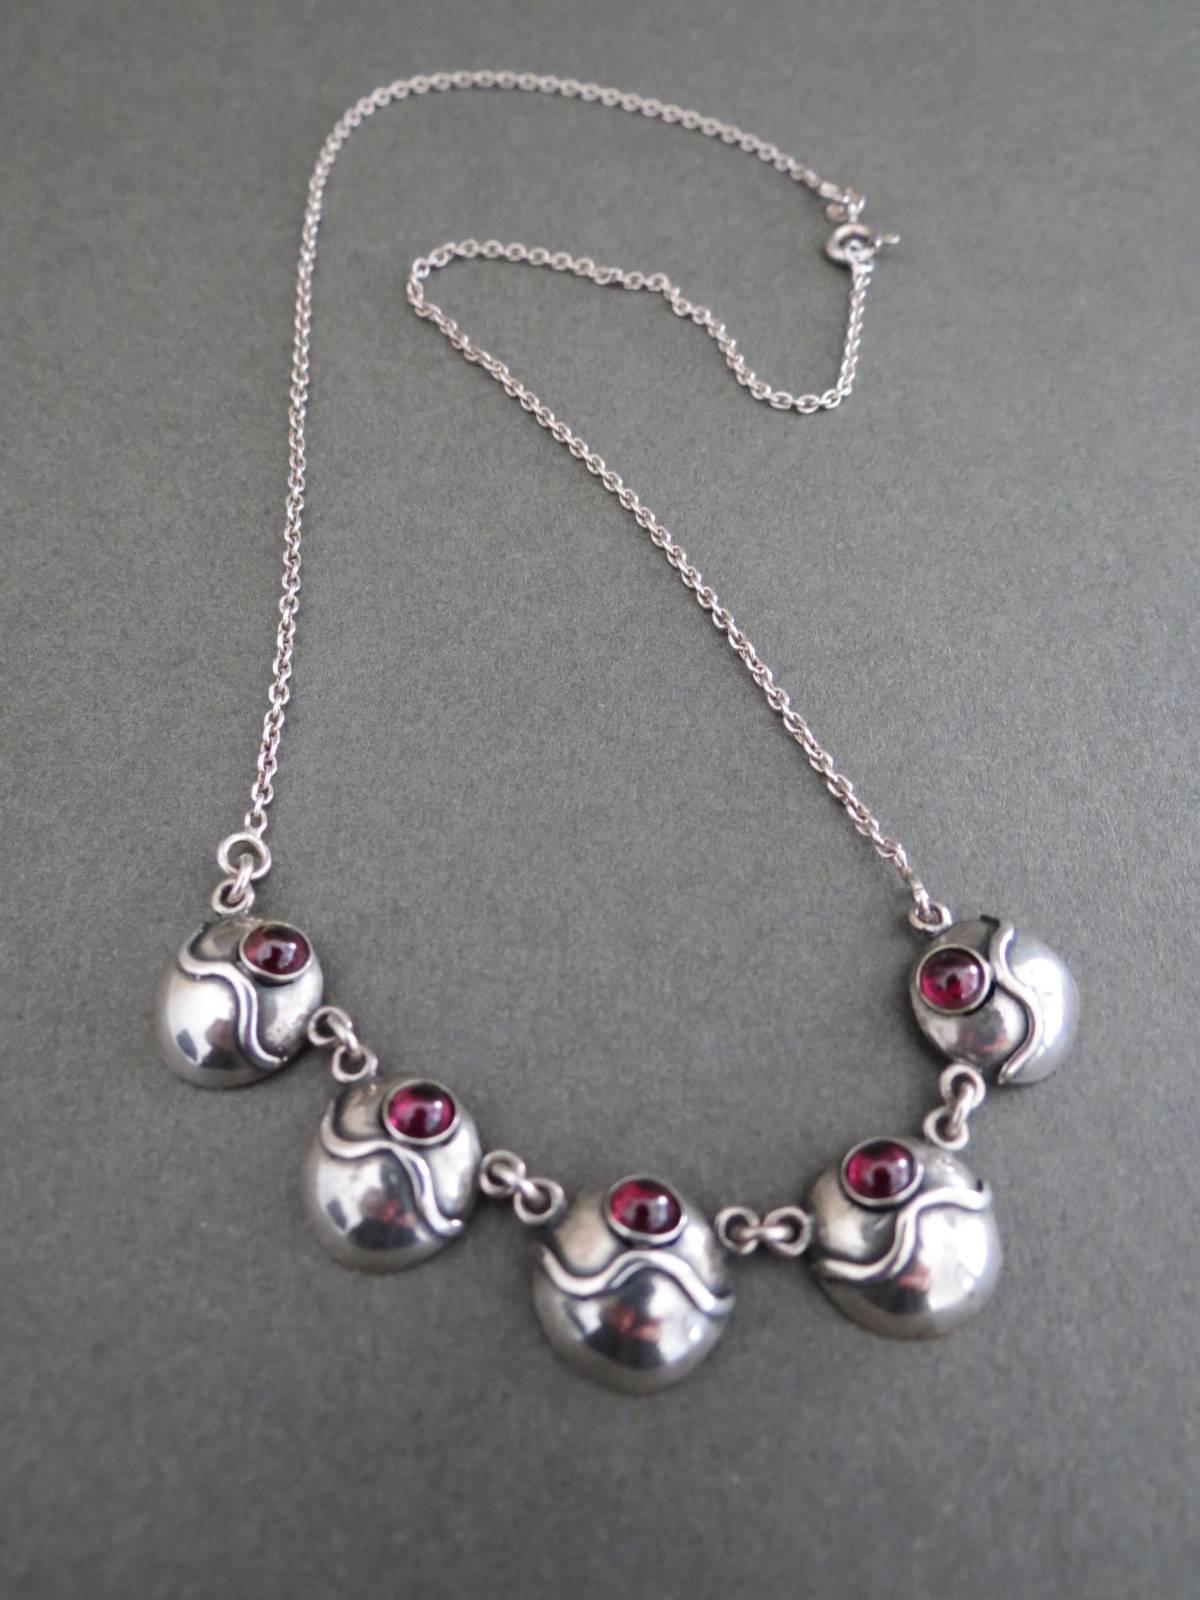 Vintage Silver Garnet Modernist Mid Century Necklace In Good Condition For Sale In Hove, GB